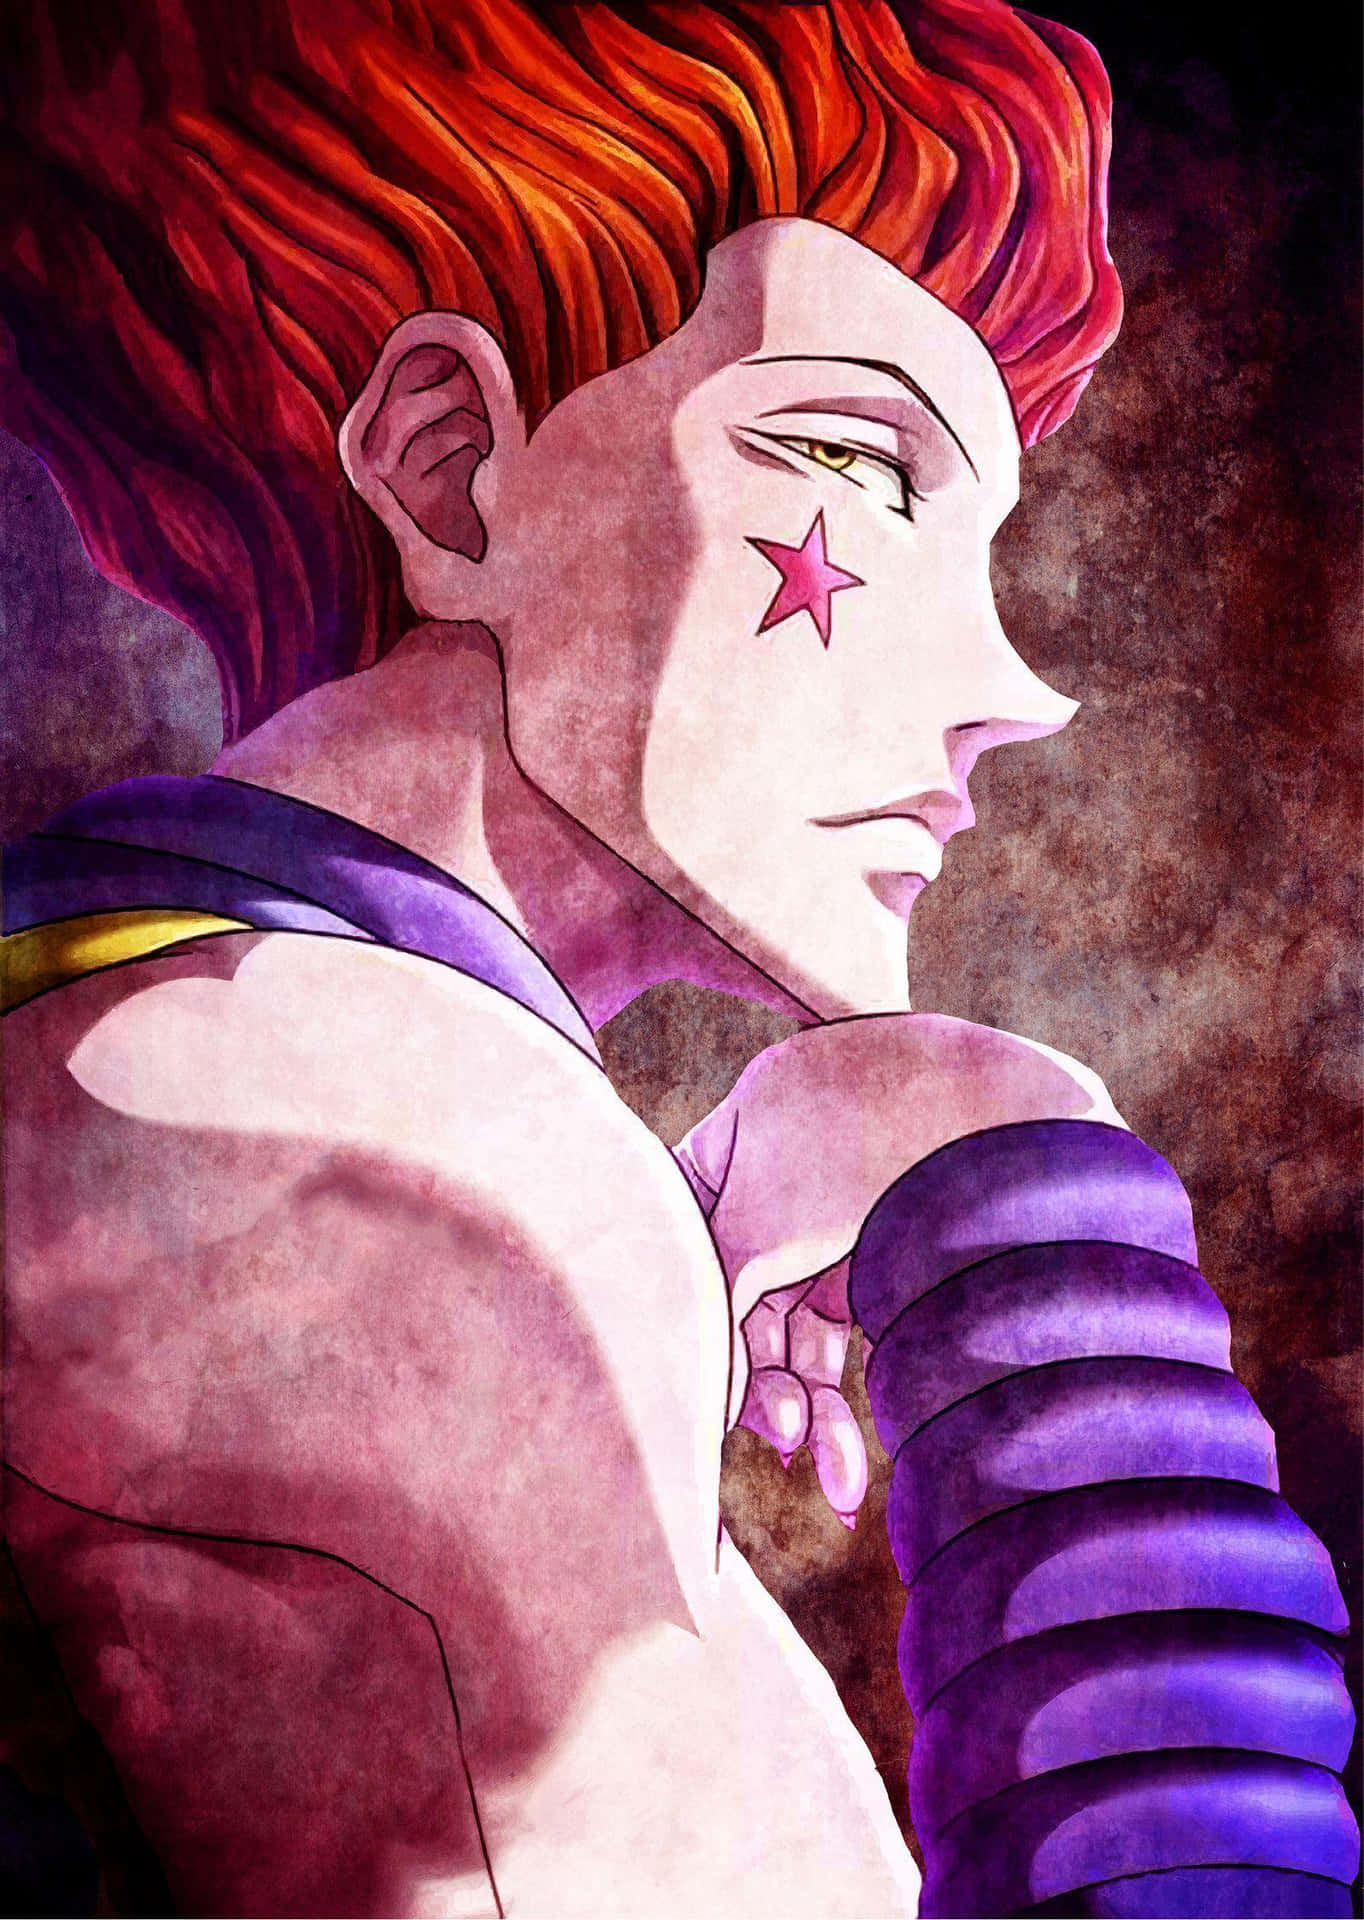 Hisoka, A Mysterious Character From the Hunter X Hunter Series